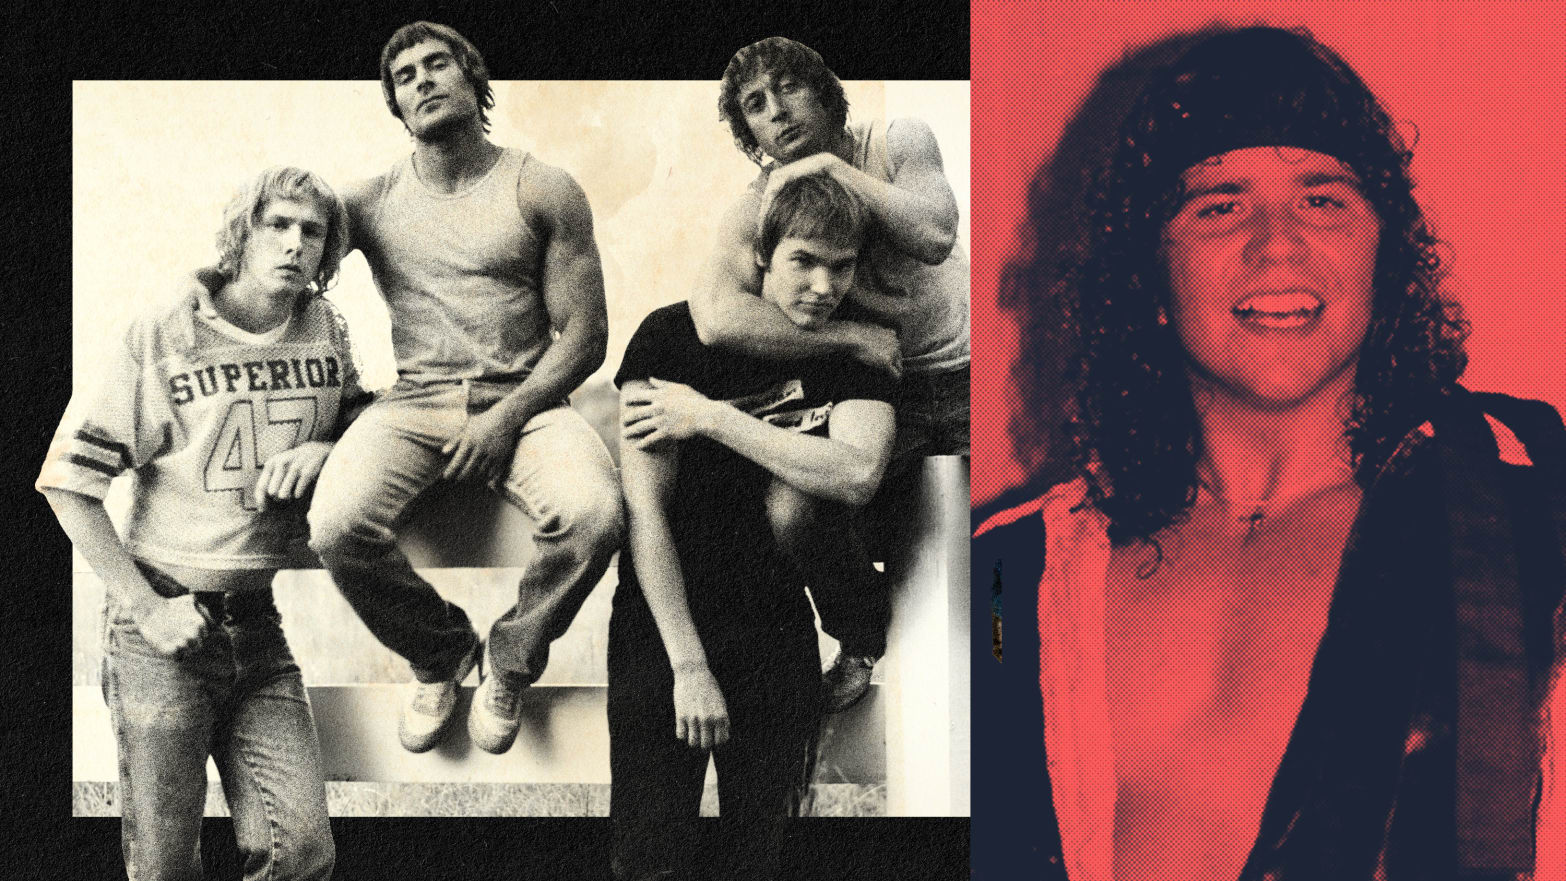 A photo illustration of the Von Erich brothers in Iron Claw and the real life Eric Von Erich